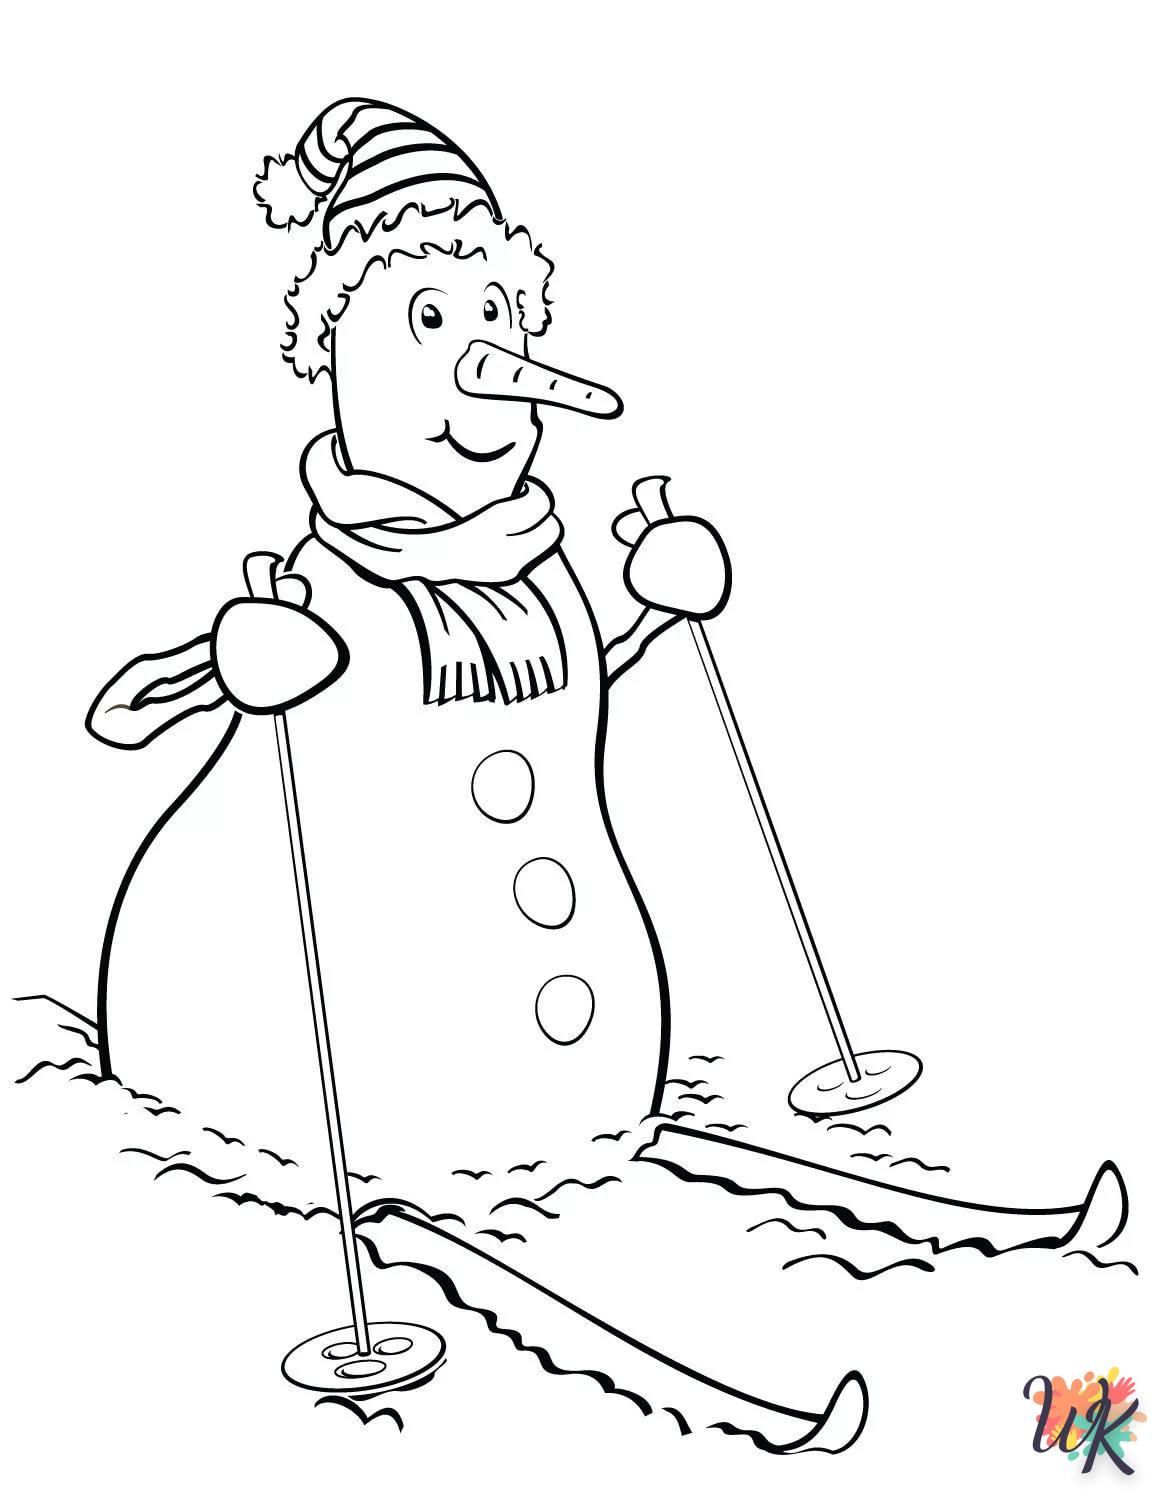 Snowman coloring page to download 1